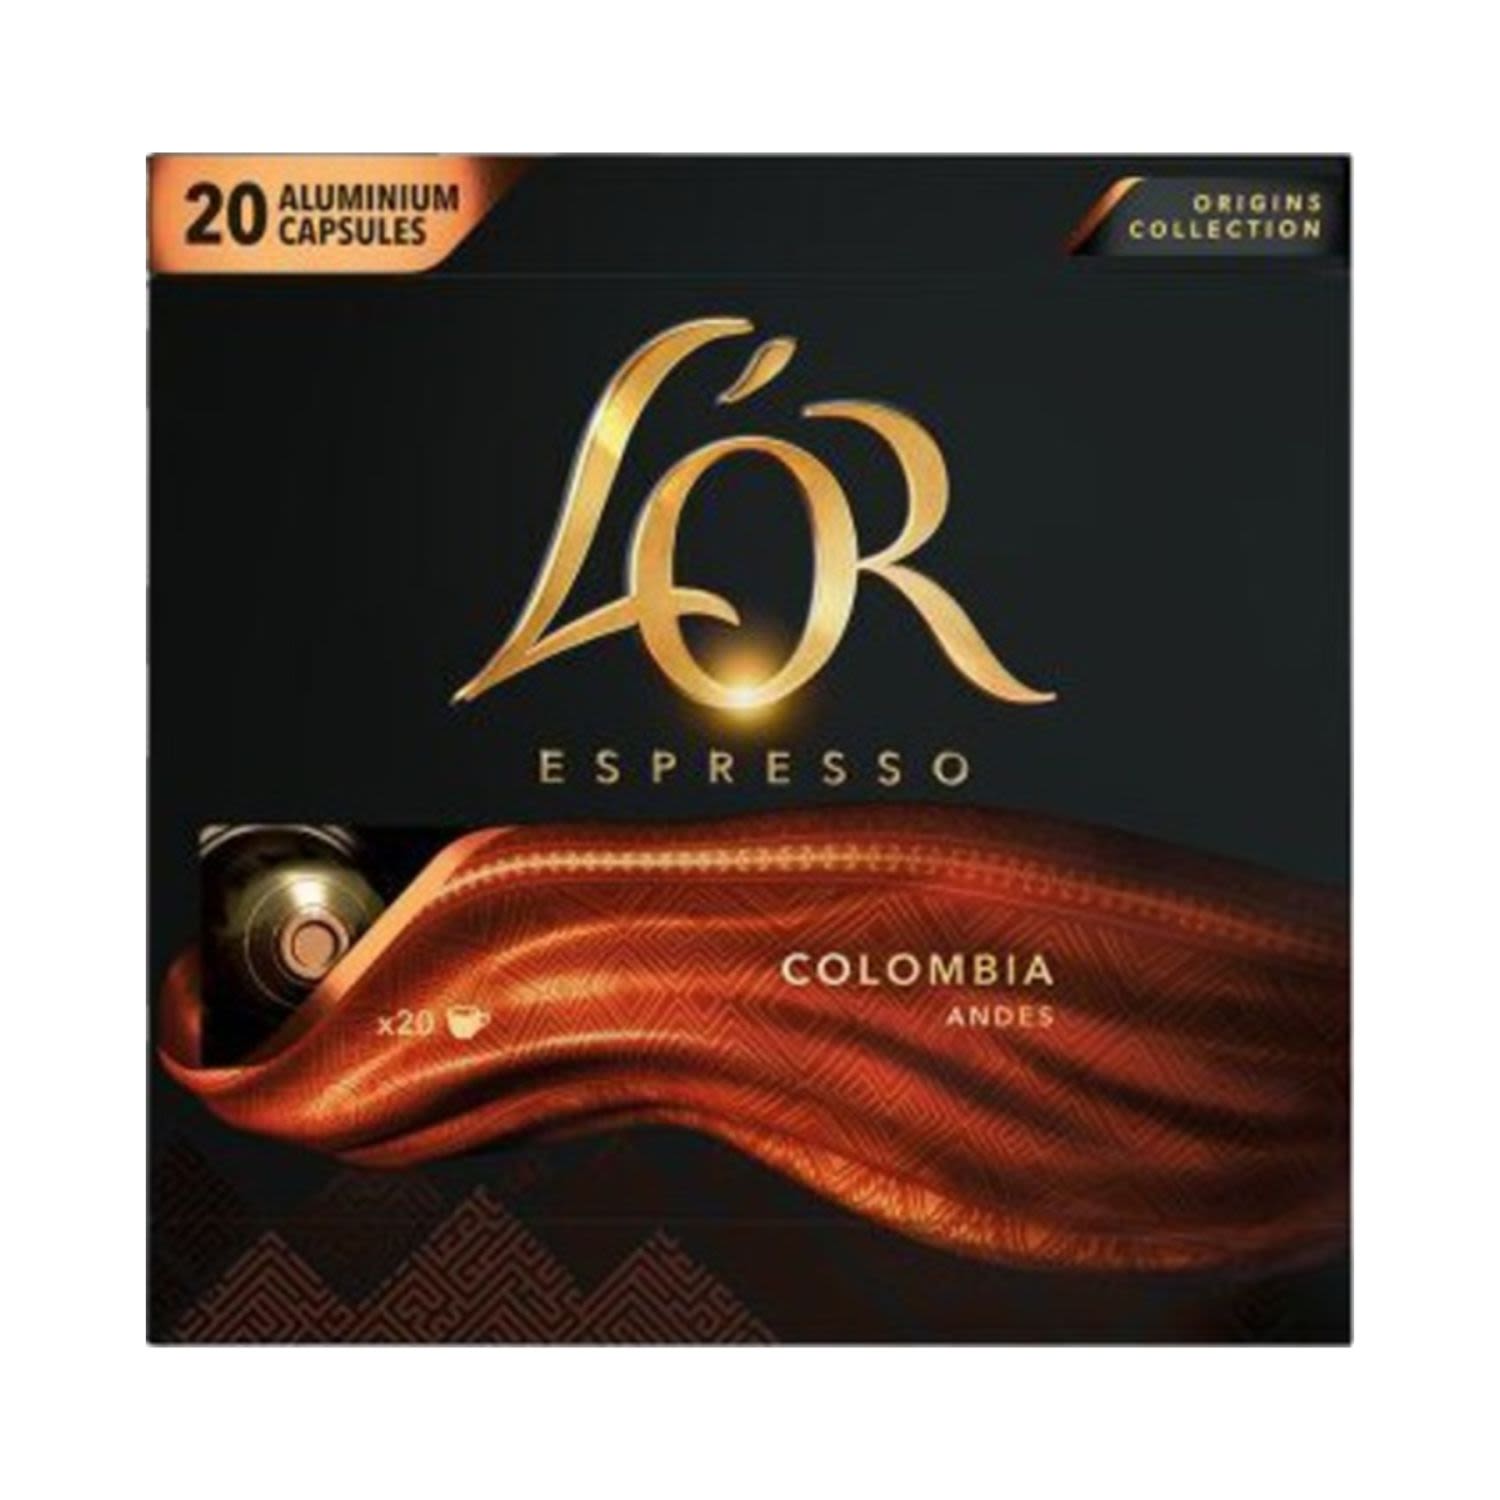 L'OR Espresso Colombia Andes Coffee Capsules, 20 Each